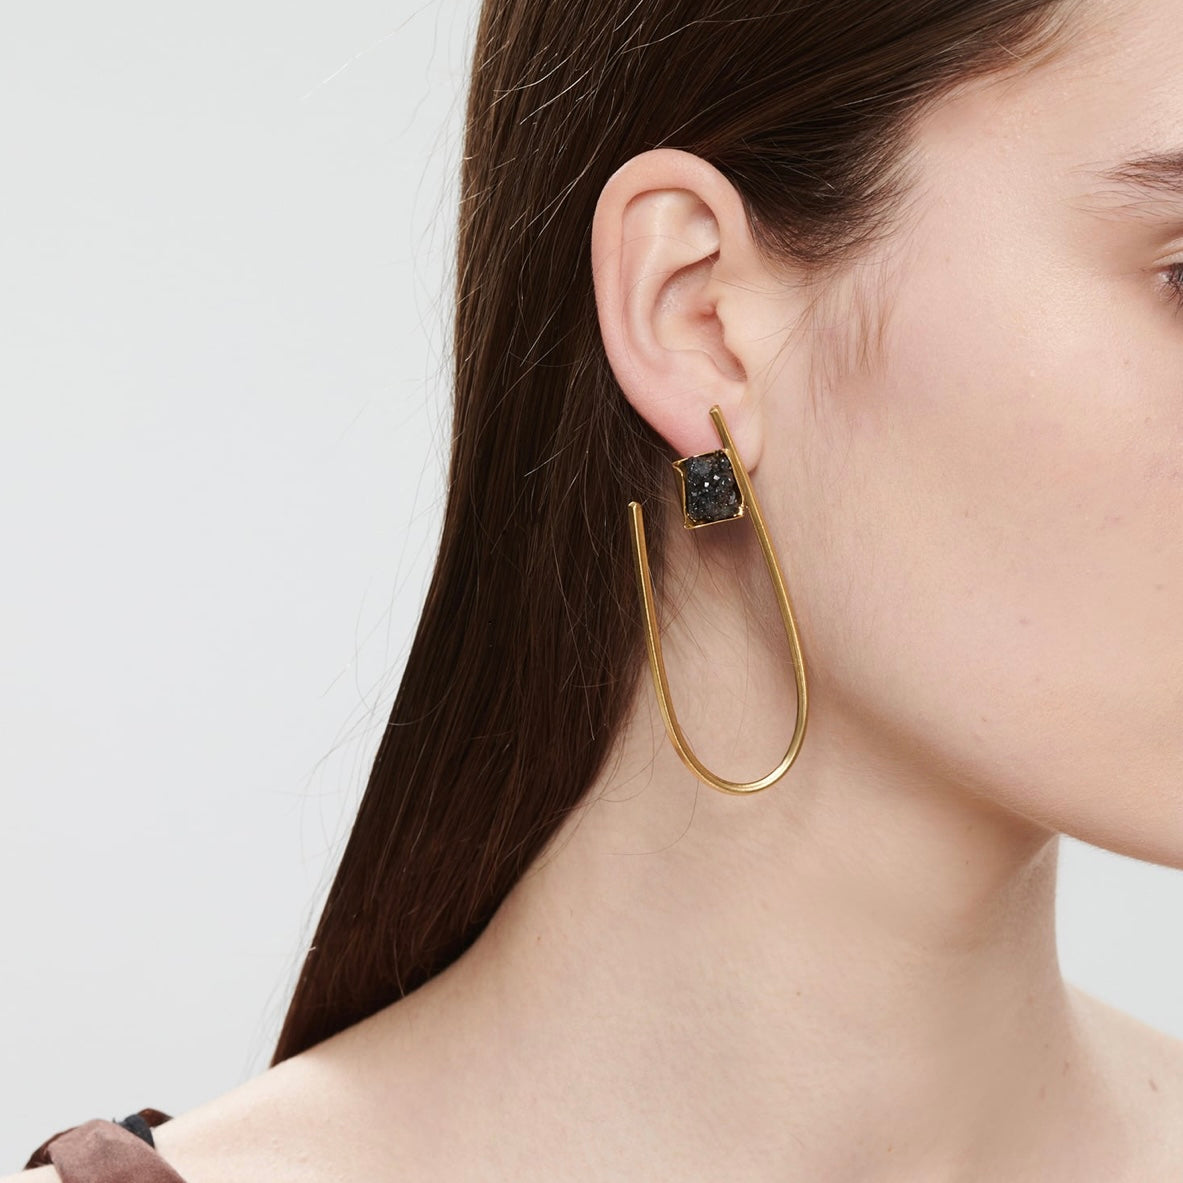 Gold Earrings with Black Agate Stone